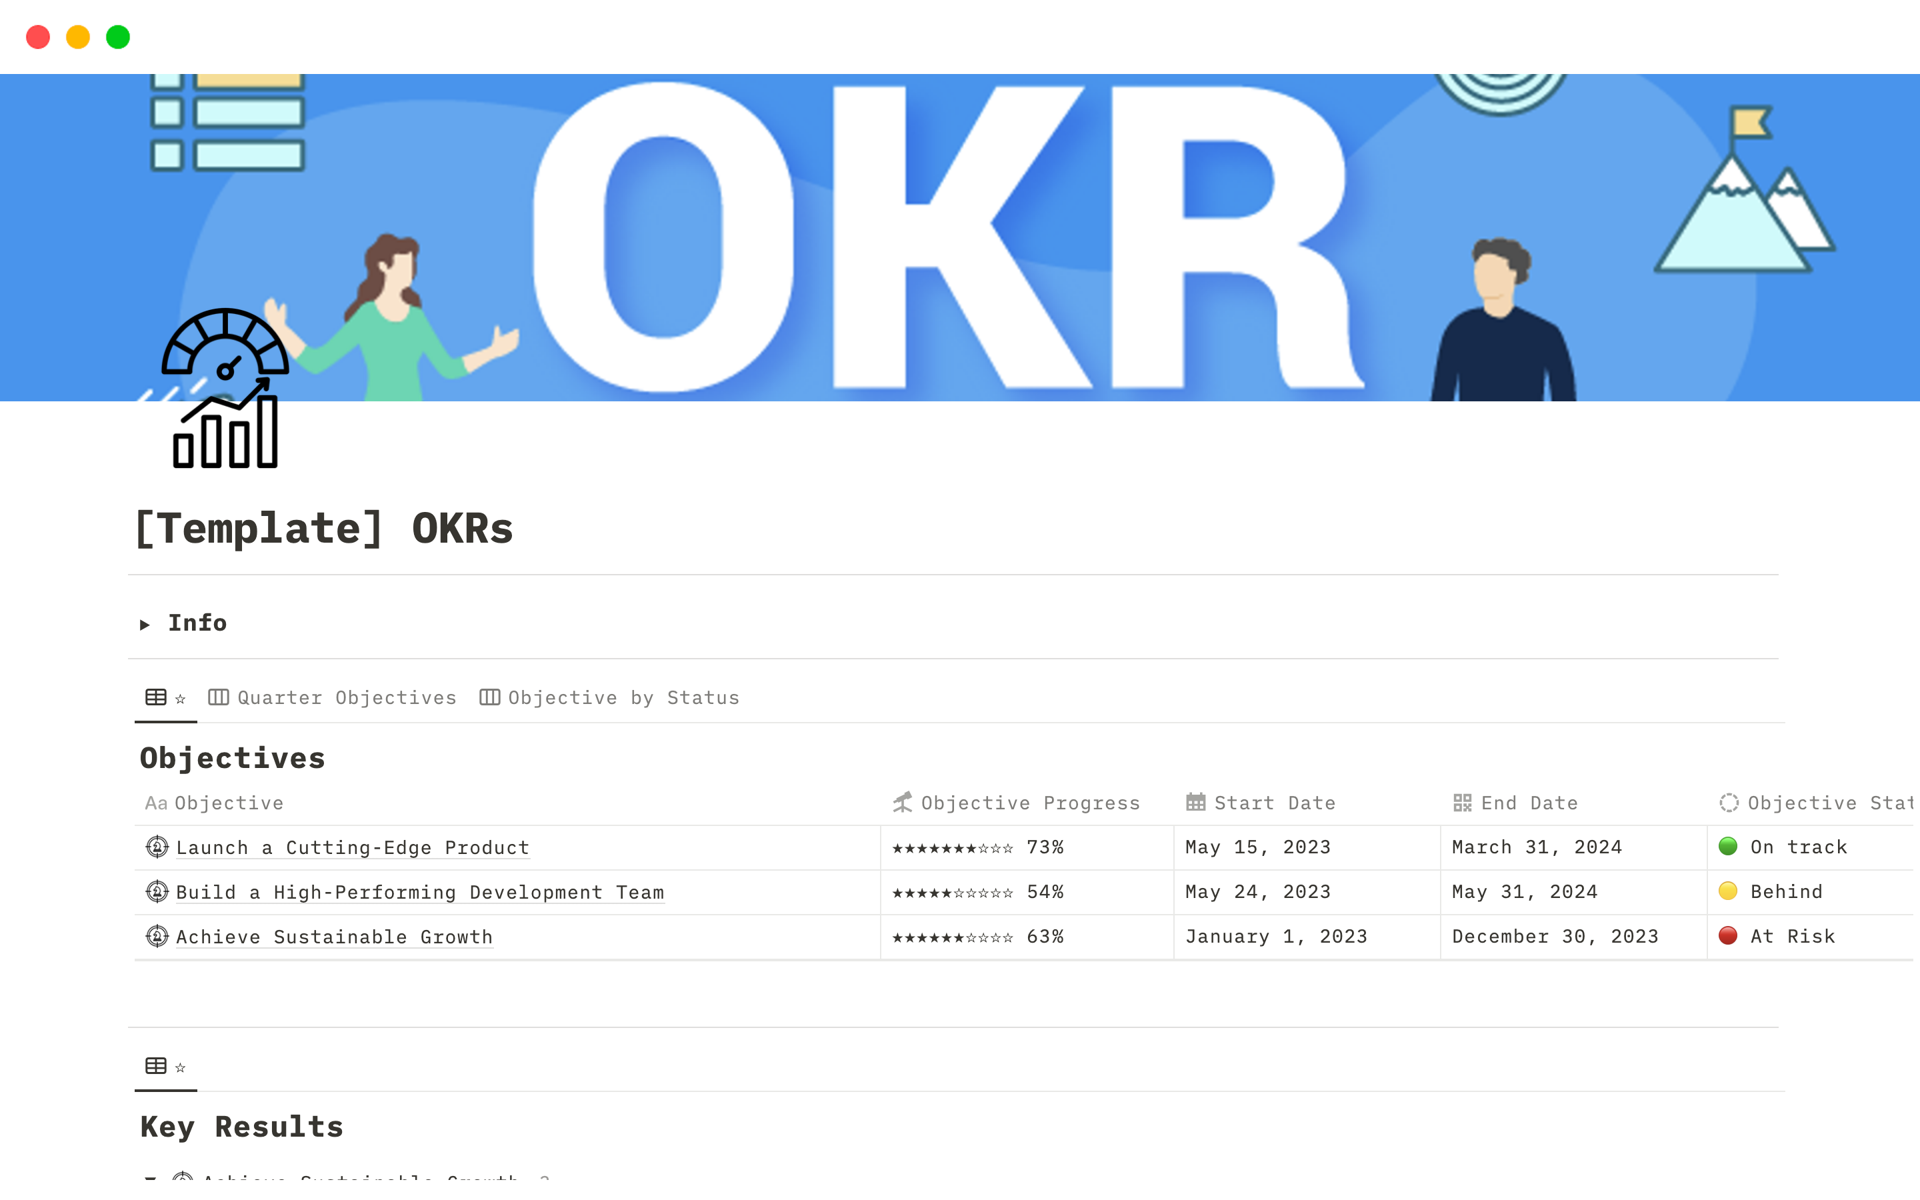 This Notion OKRs template offers a structured approach to goal setting, simplifying progress tracking, and providing insightful status and progress assessment of objectives and key results through clever formulas working behind the scenes.